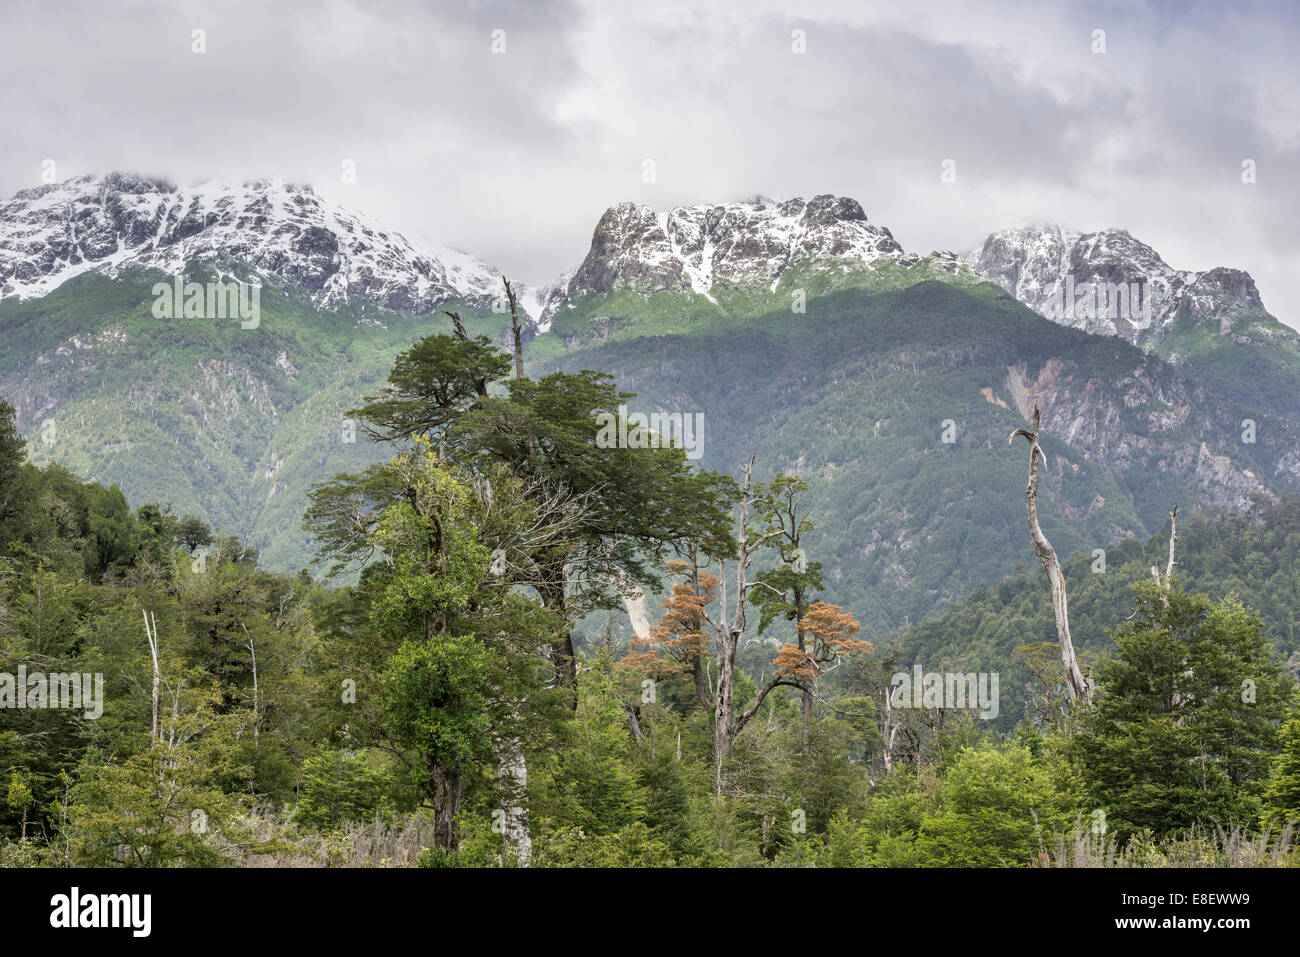 Snow-covered mountains and a cold rain forest, Carretera Austral, Chaitén, Los Lagos Region, Chile Stock Photo